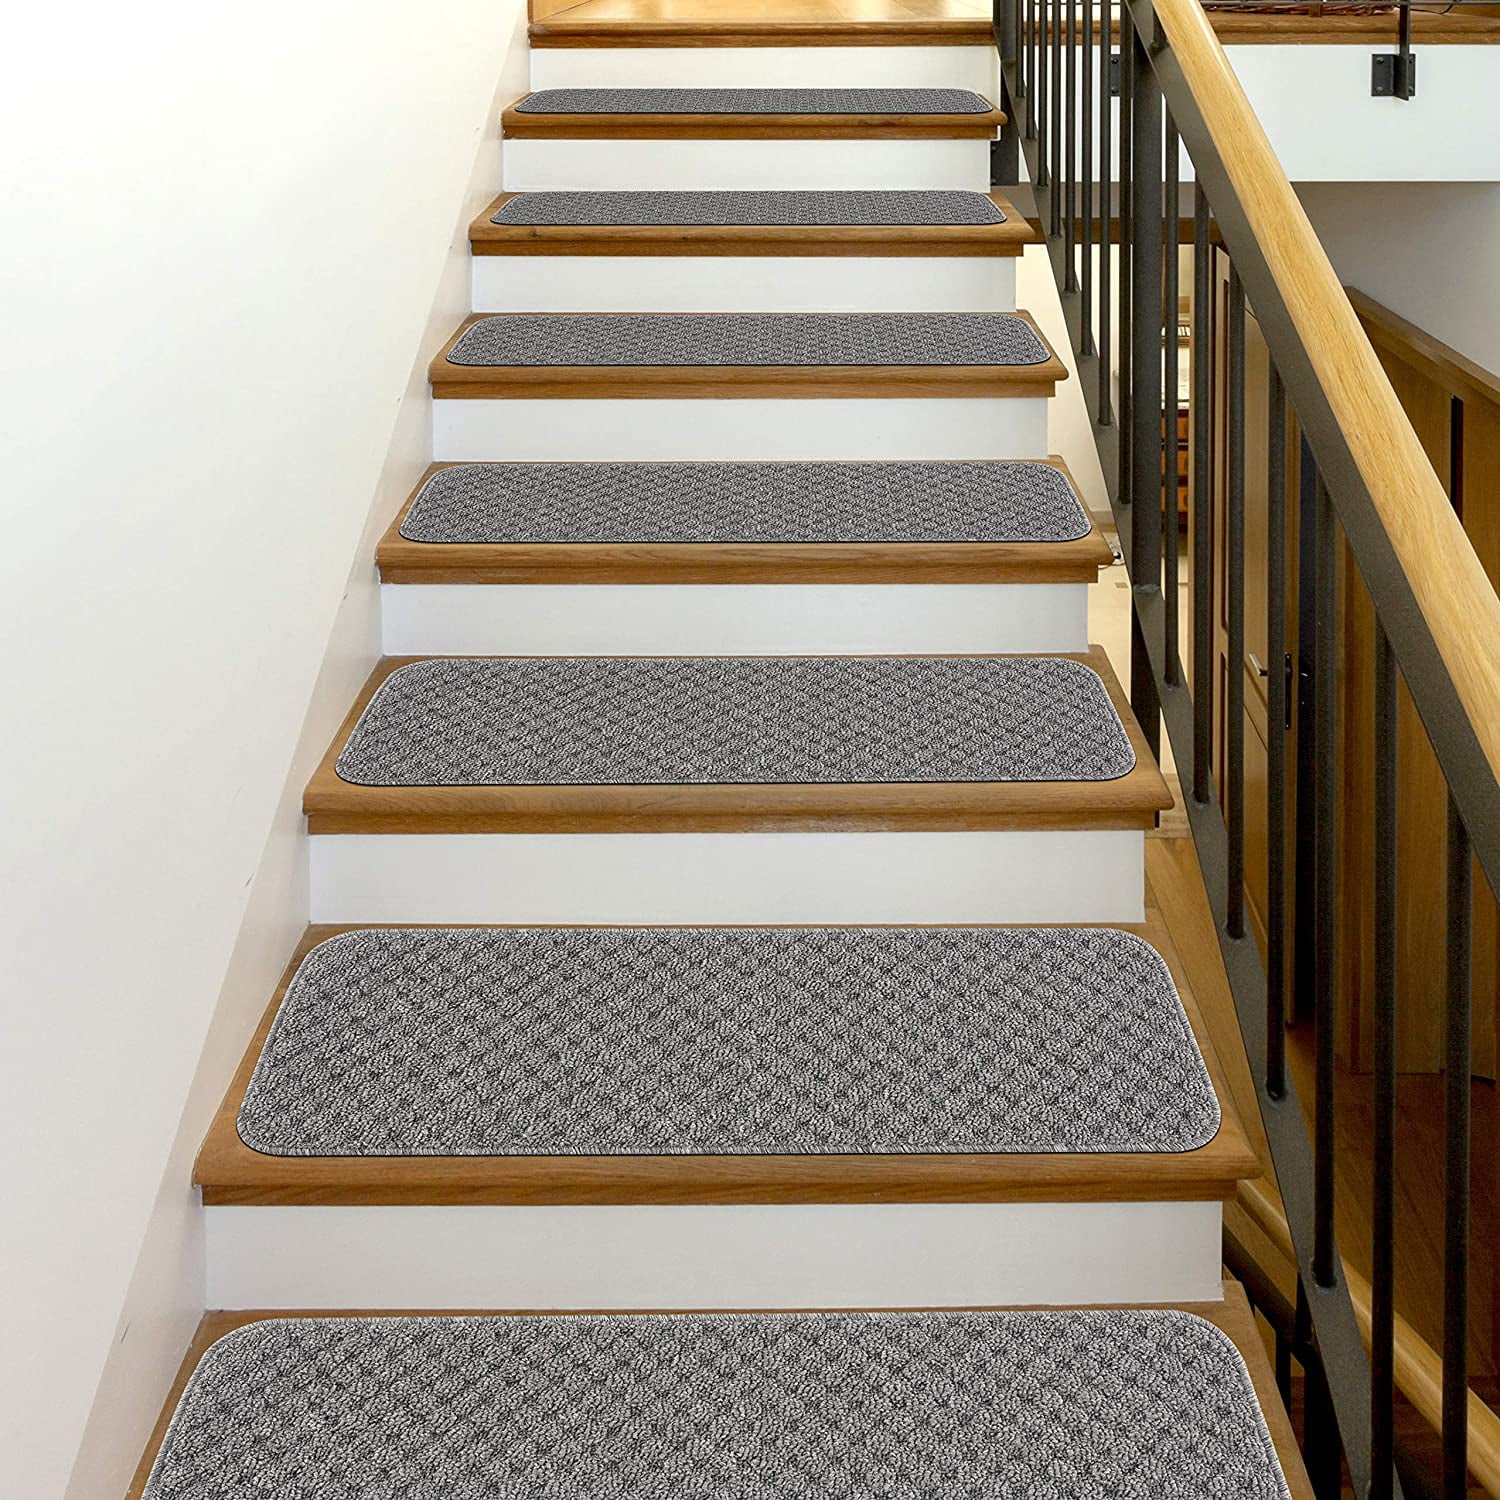 Stair Mat Carpet Stair Treads Non Skid Rubber Back Washable Mat SET OF 7 